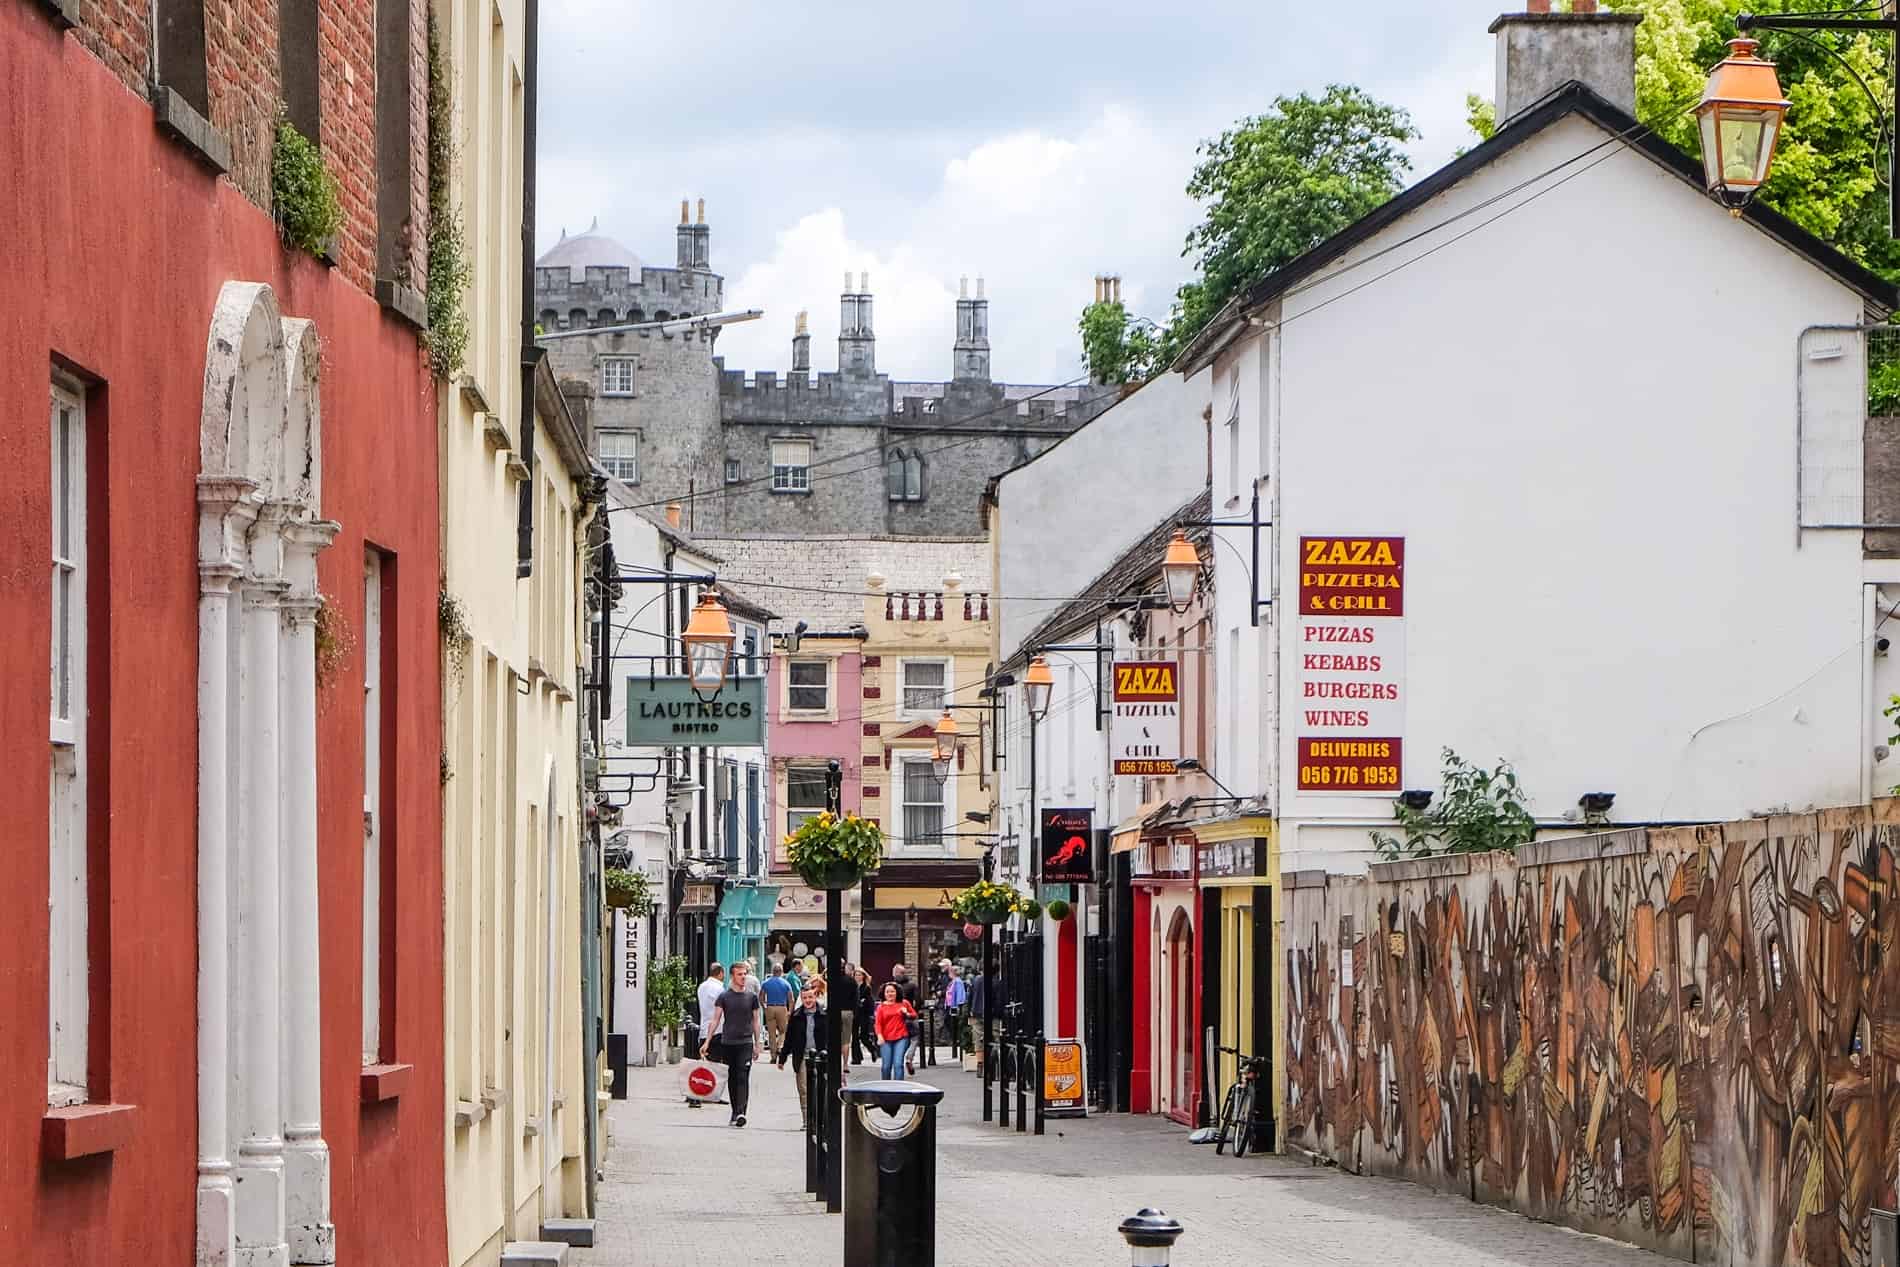 People walking down an old street in Kilkenny Ireland, filled with colourful painted houses, to the backdrop of a grey fortress building.